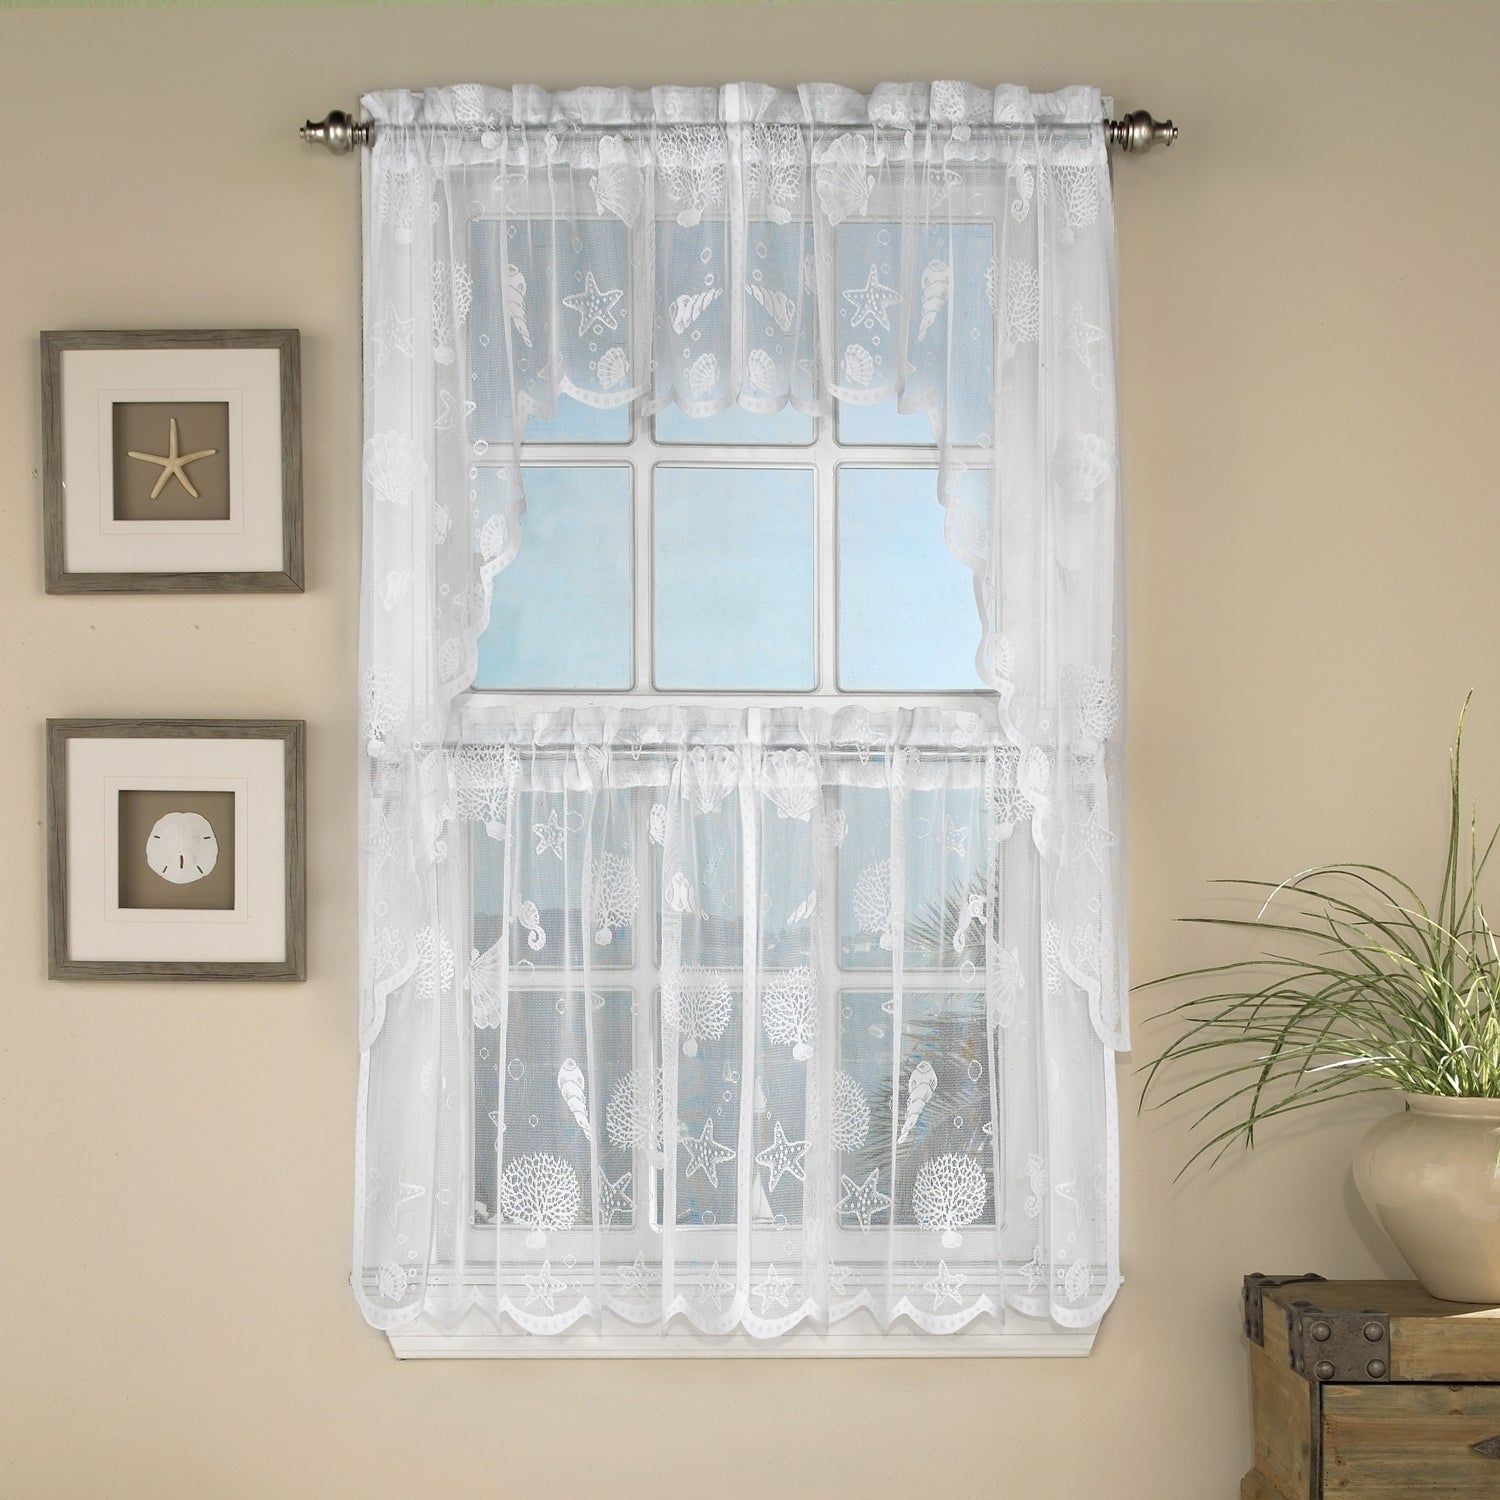 Marine Life Motif Knitted Lace Window Curtain Pieces Pertaining To Elegant White Priscilla Lace Kitchen Curtain Pieces (View 6 of 20)